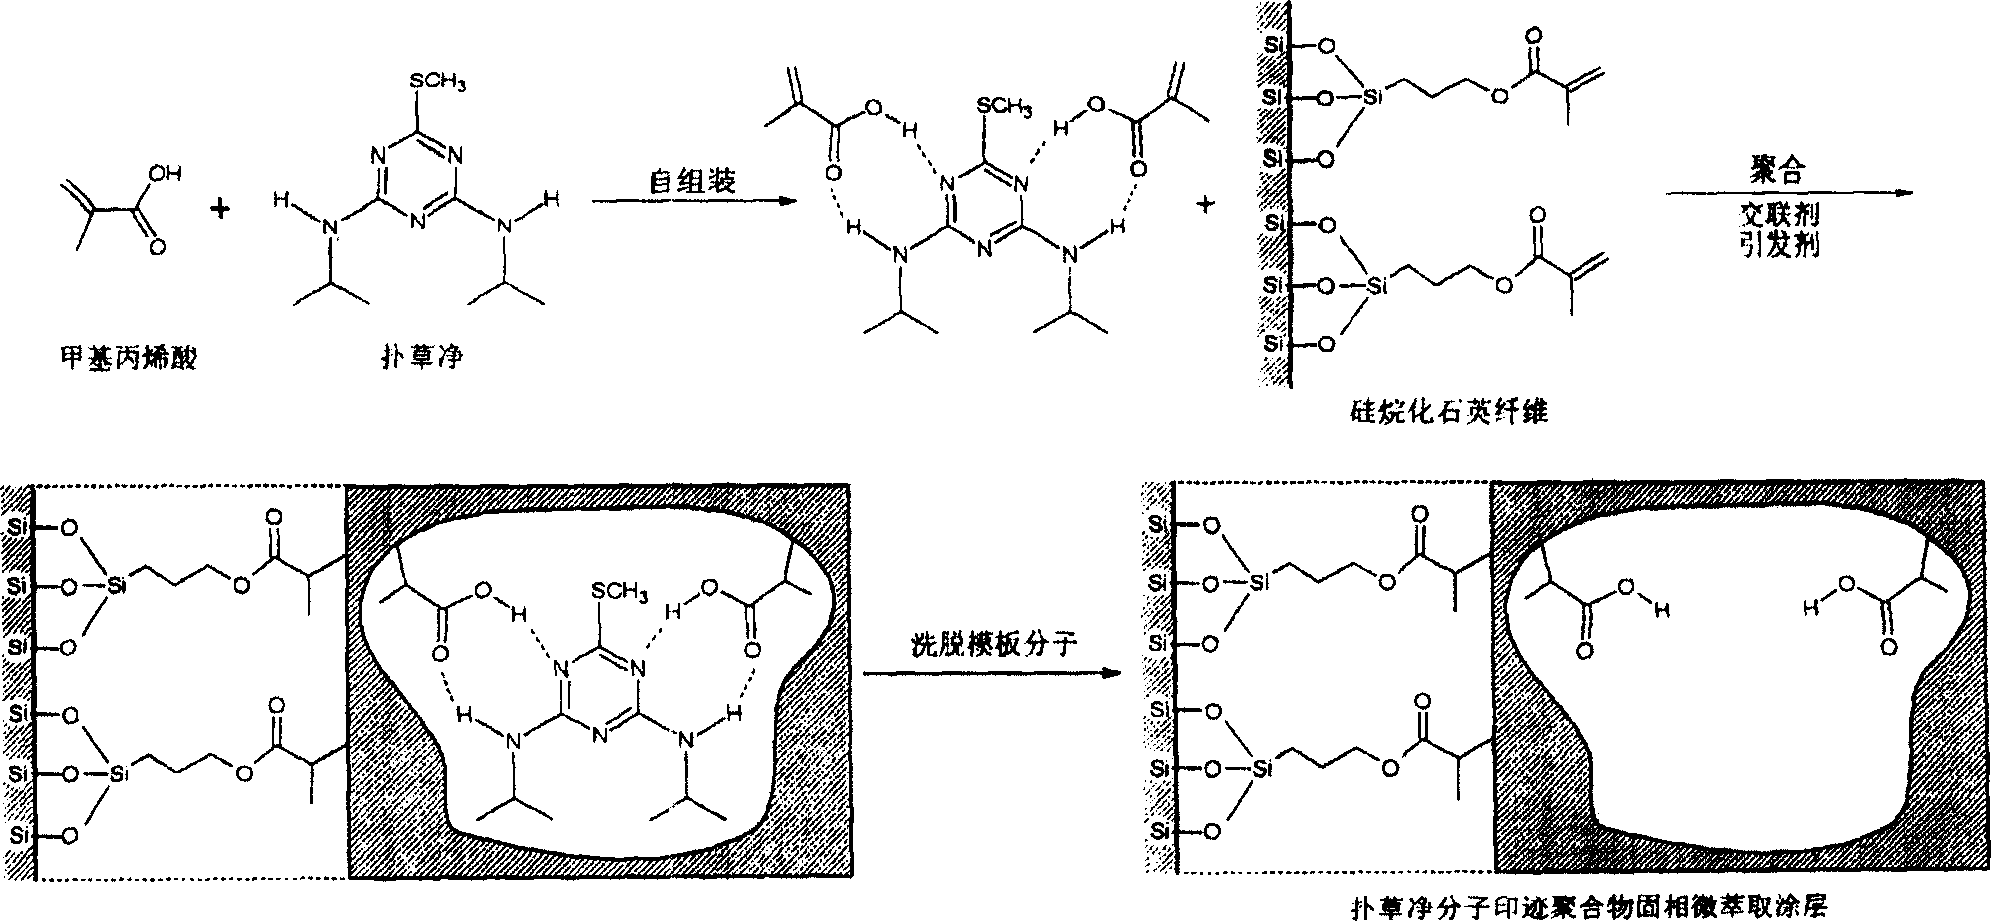 Molecular blotting solid phase microextraction coating preparation method